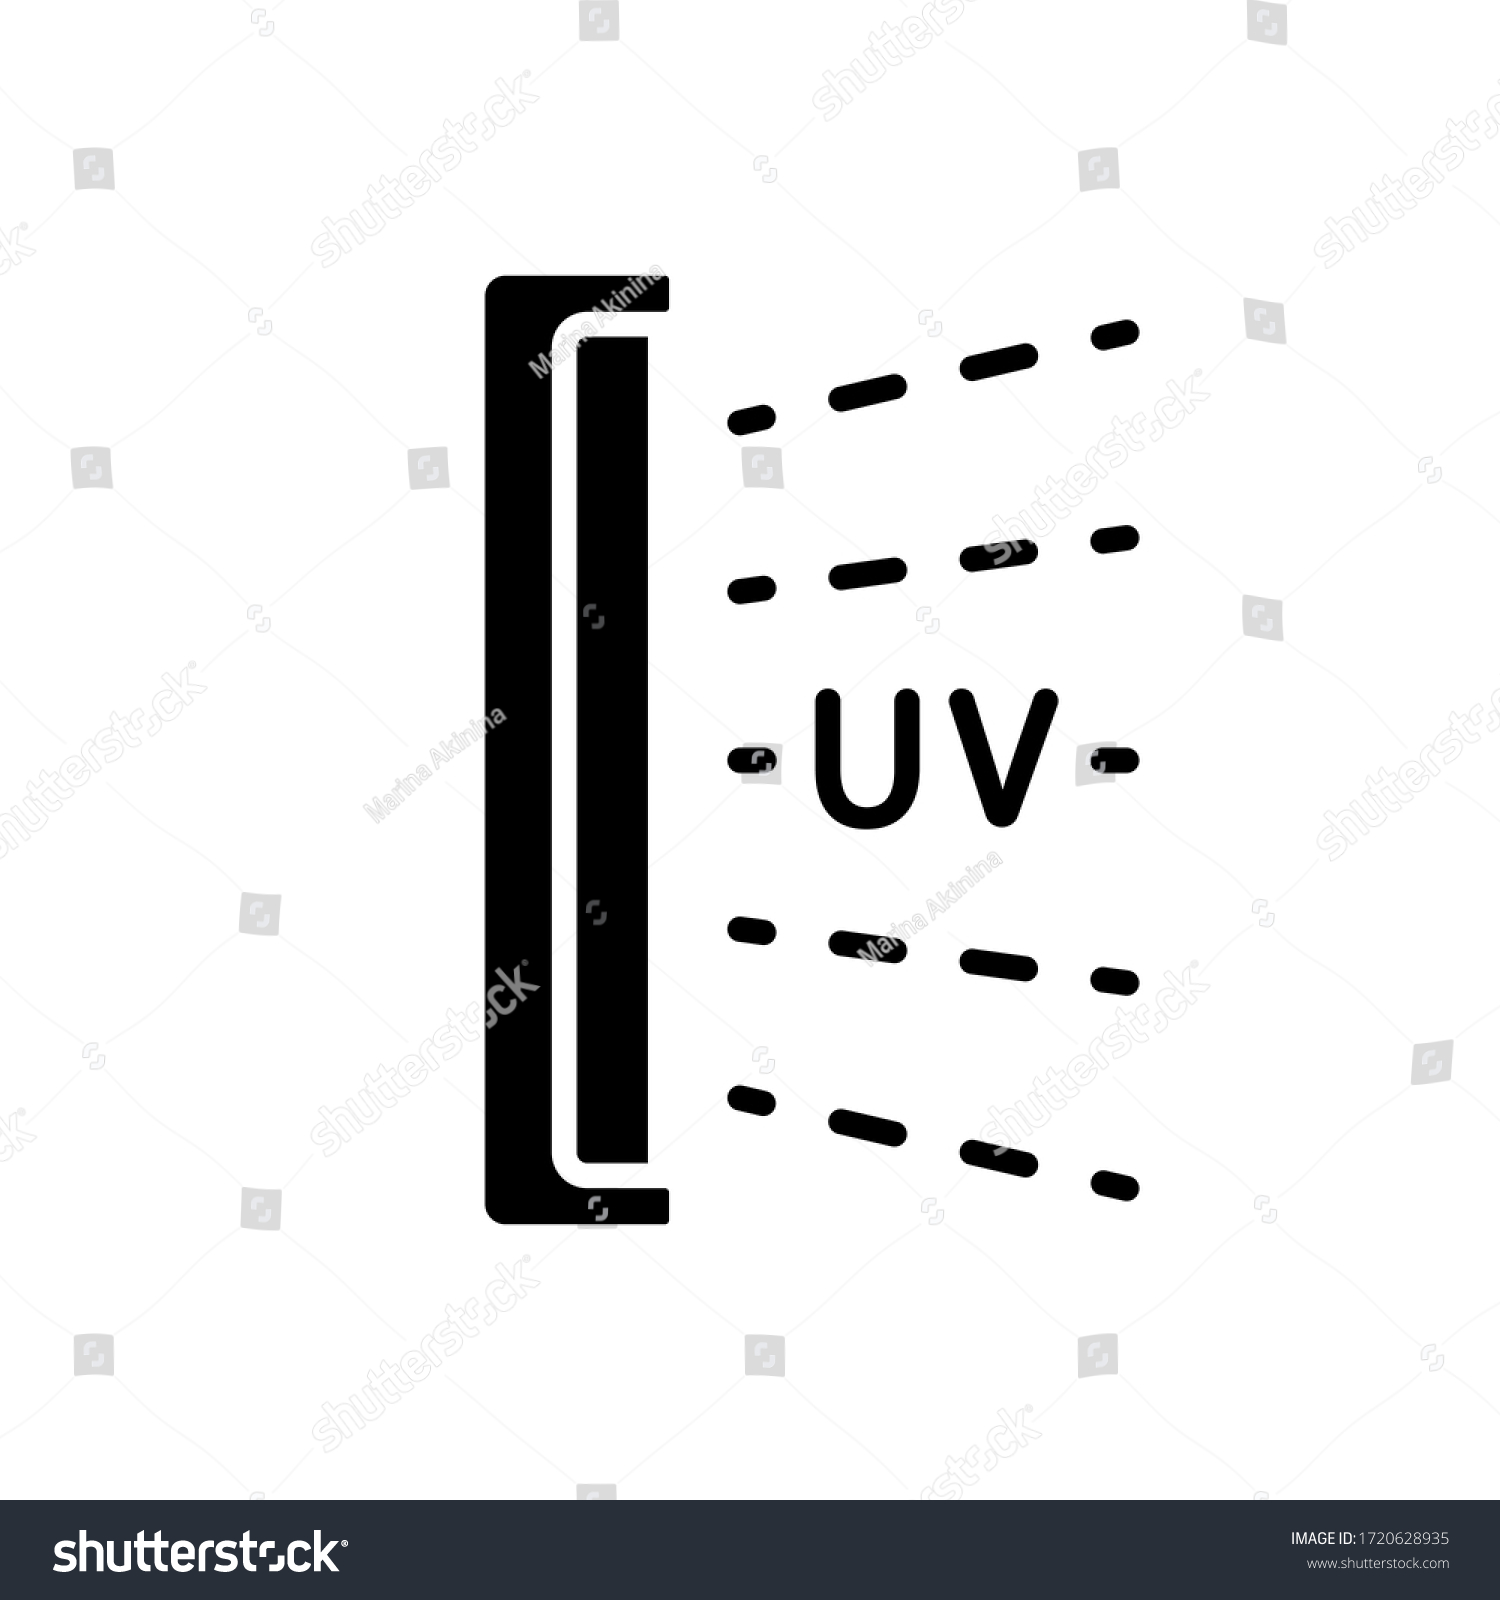 Silhouette Bactericidal UV lamp. Outline icon of disinfection light. Black illustration of medical device for home, clinic, hospital. Flat isolated vector on white background. Pandemic prevention #1720628935